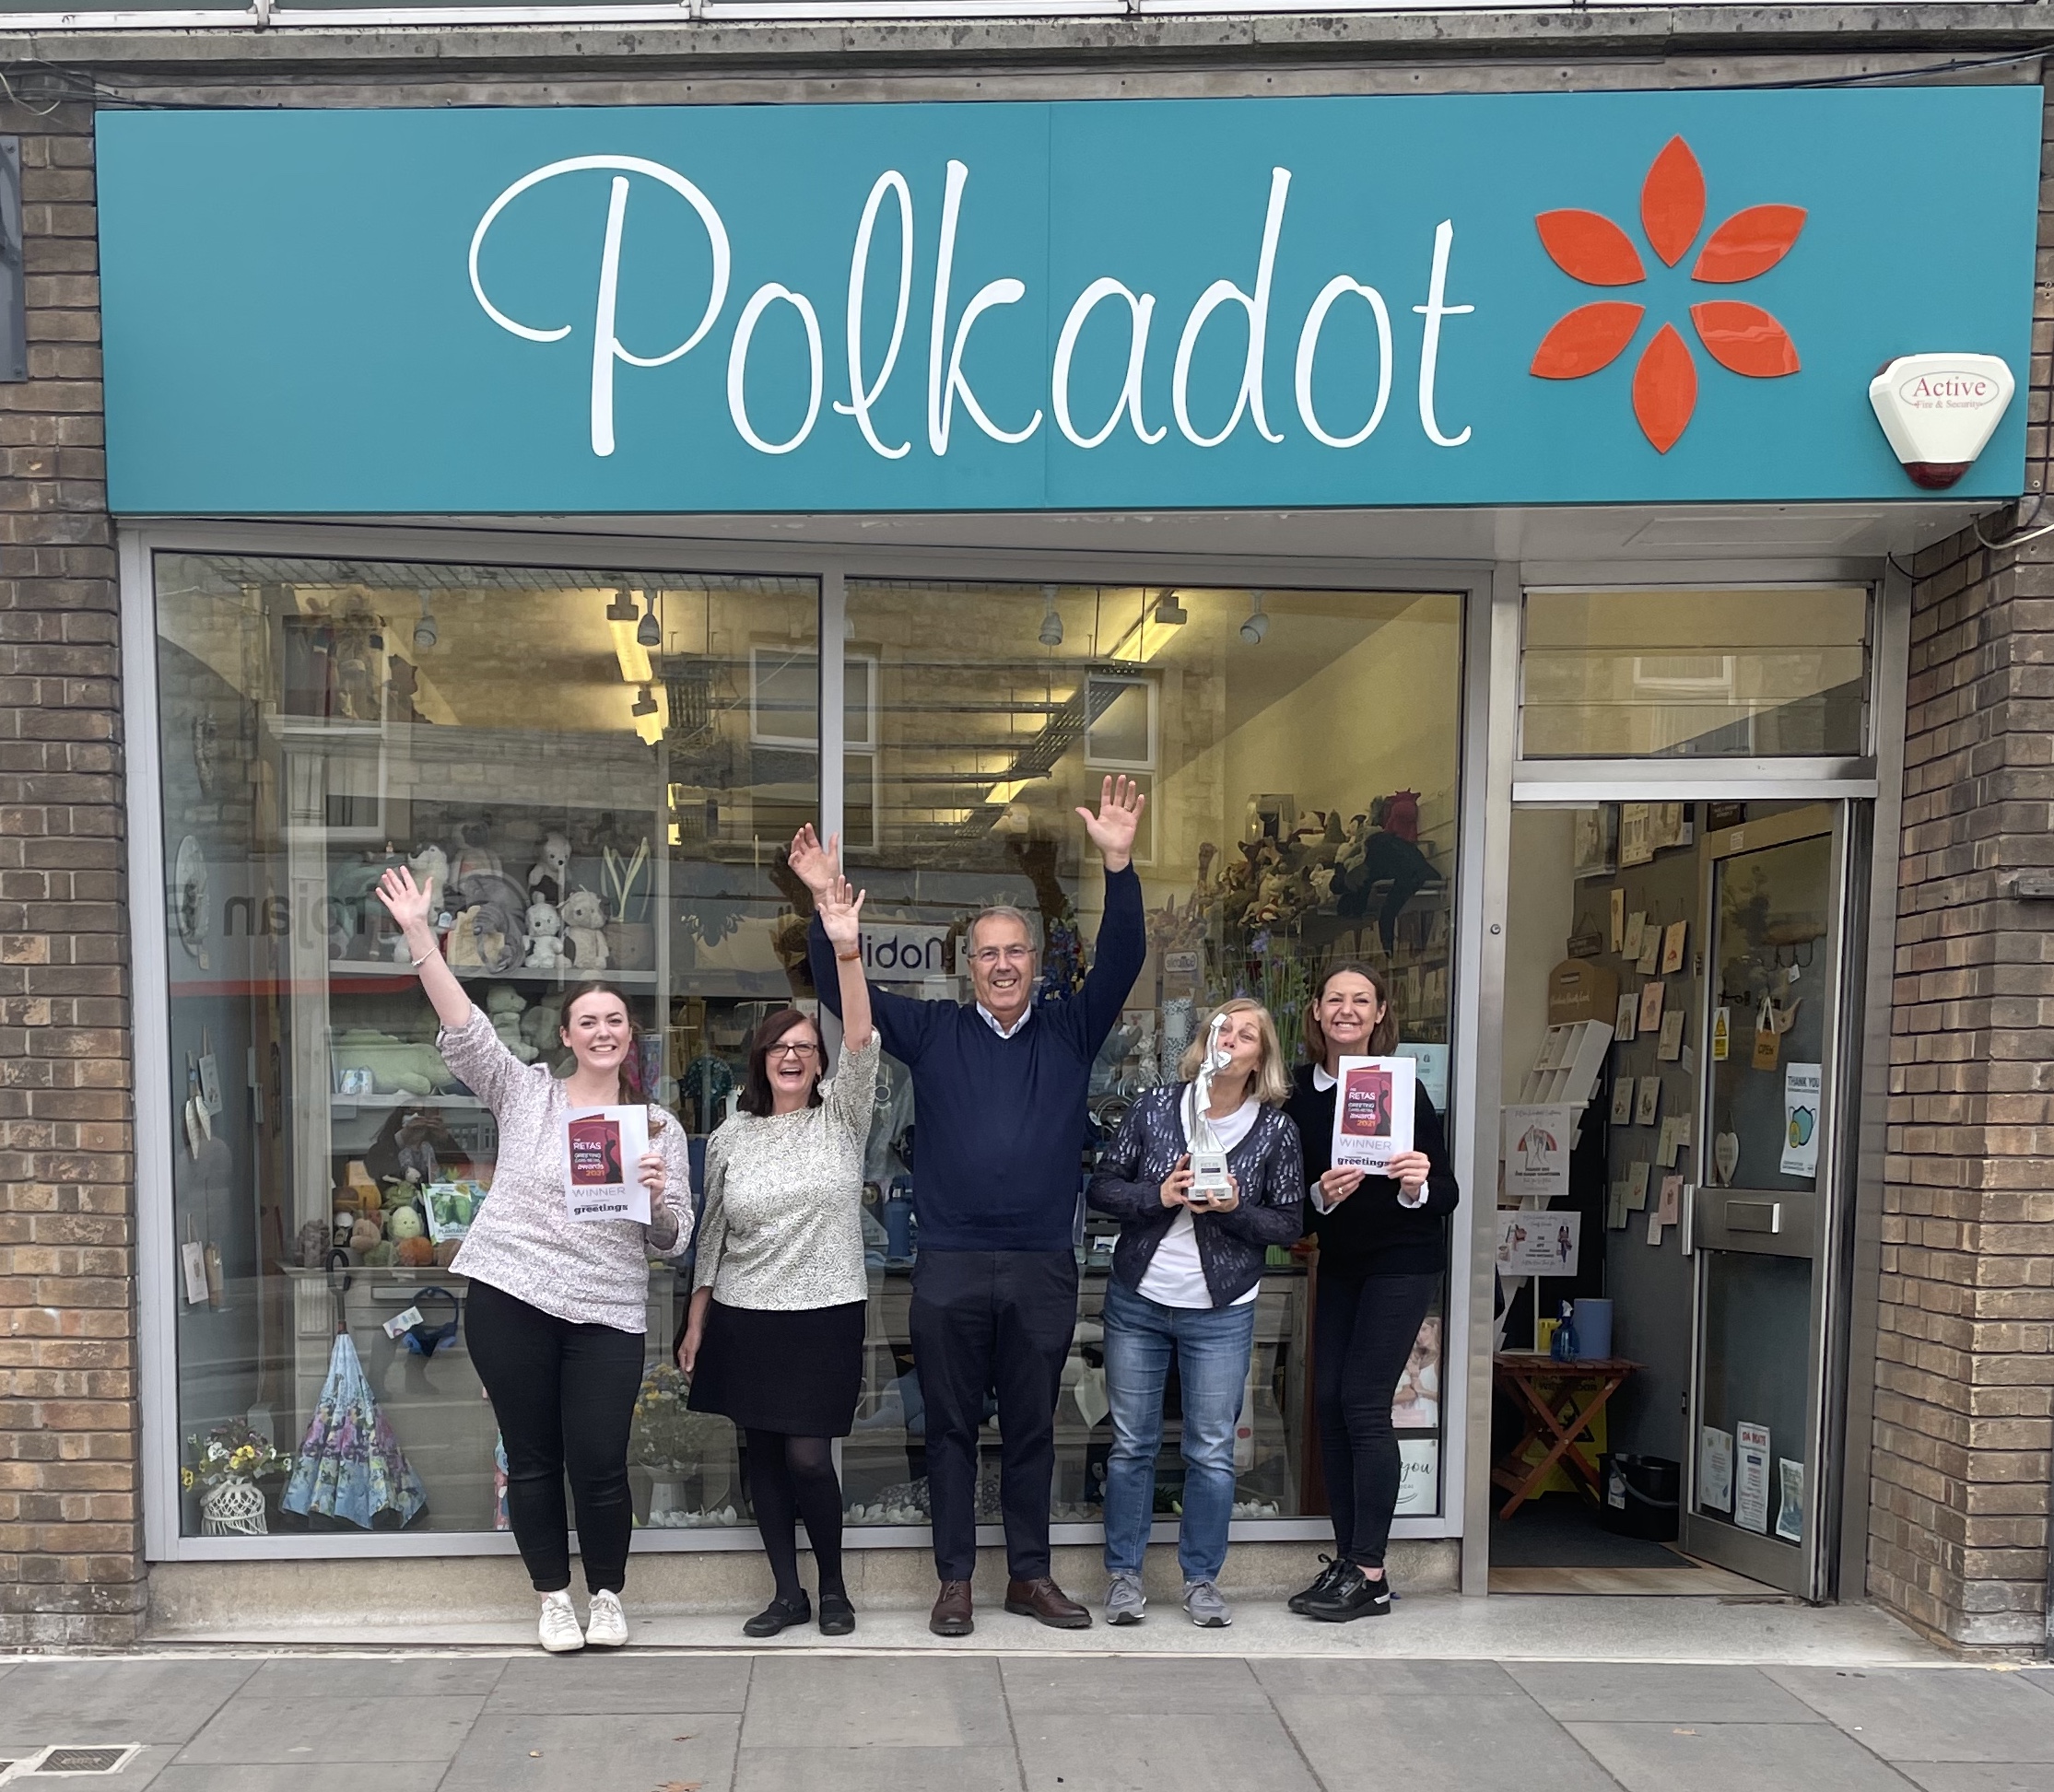 Above: Chris Bryant and The Retas trophy with some of the team outside the Polkadot shop in Keynsham.